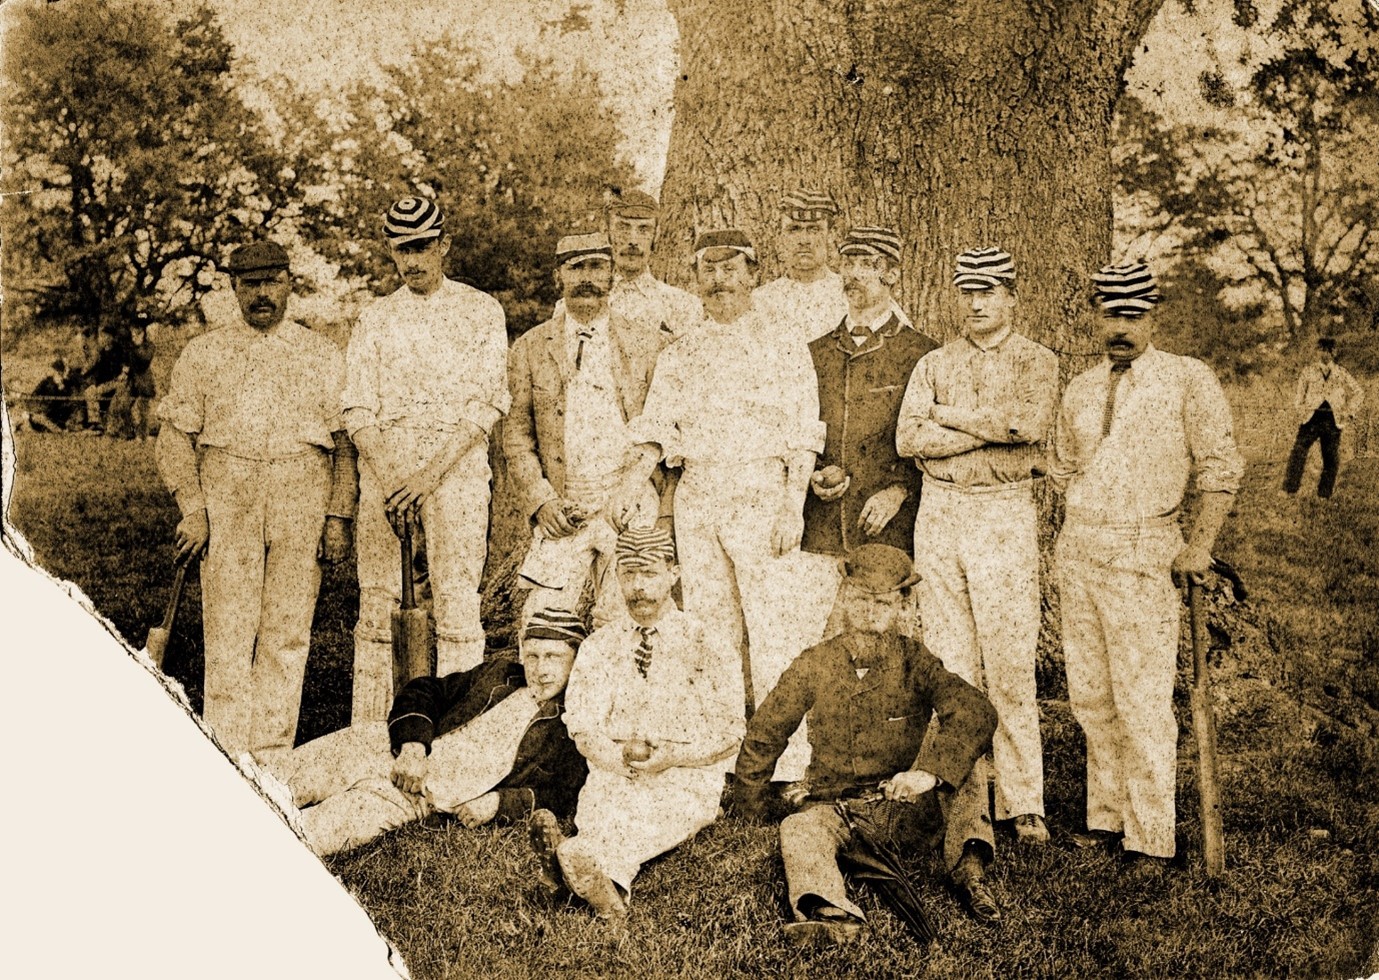 The United XI of England. Harry Jupp, the first Englishman to face a ball in test cricket, is standing on the right, and W.G. Grace’s cousin Walter Gilbert is standing in the centre.